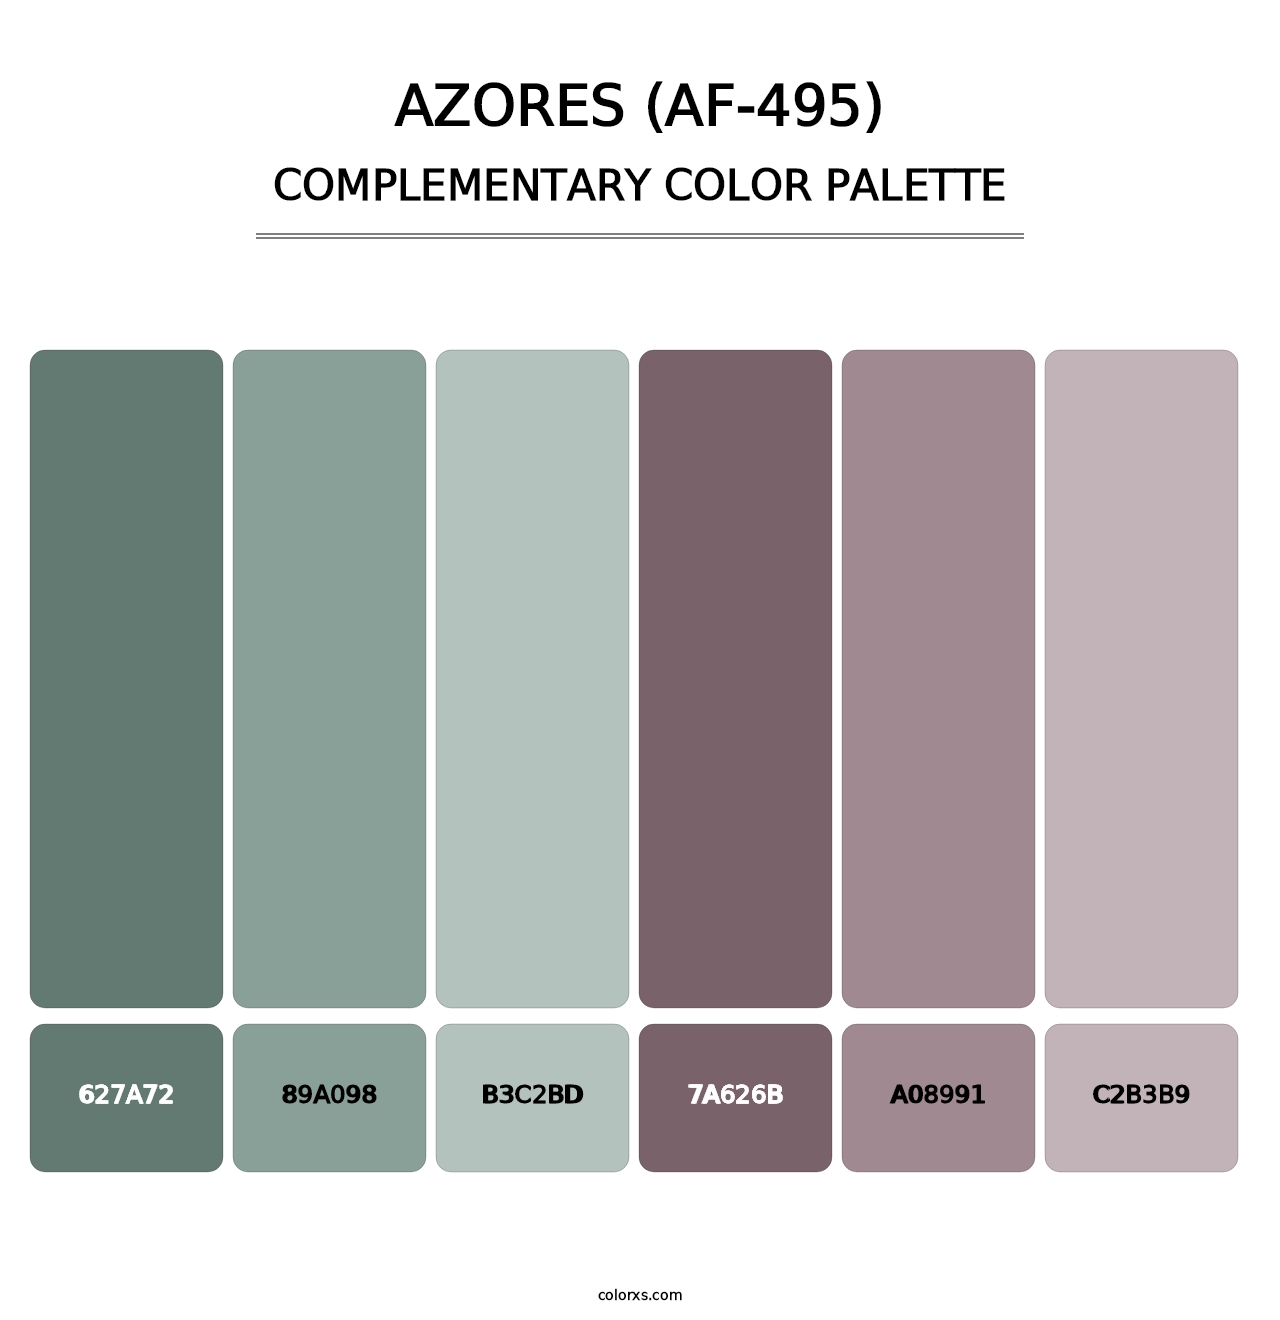 Azores (AF-495) - Complementary Color Palette